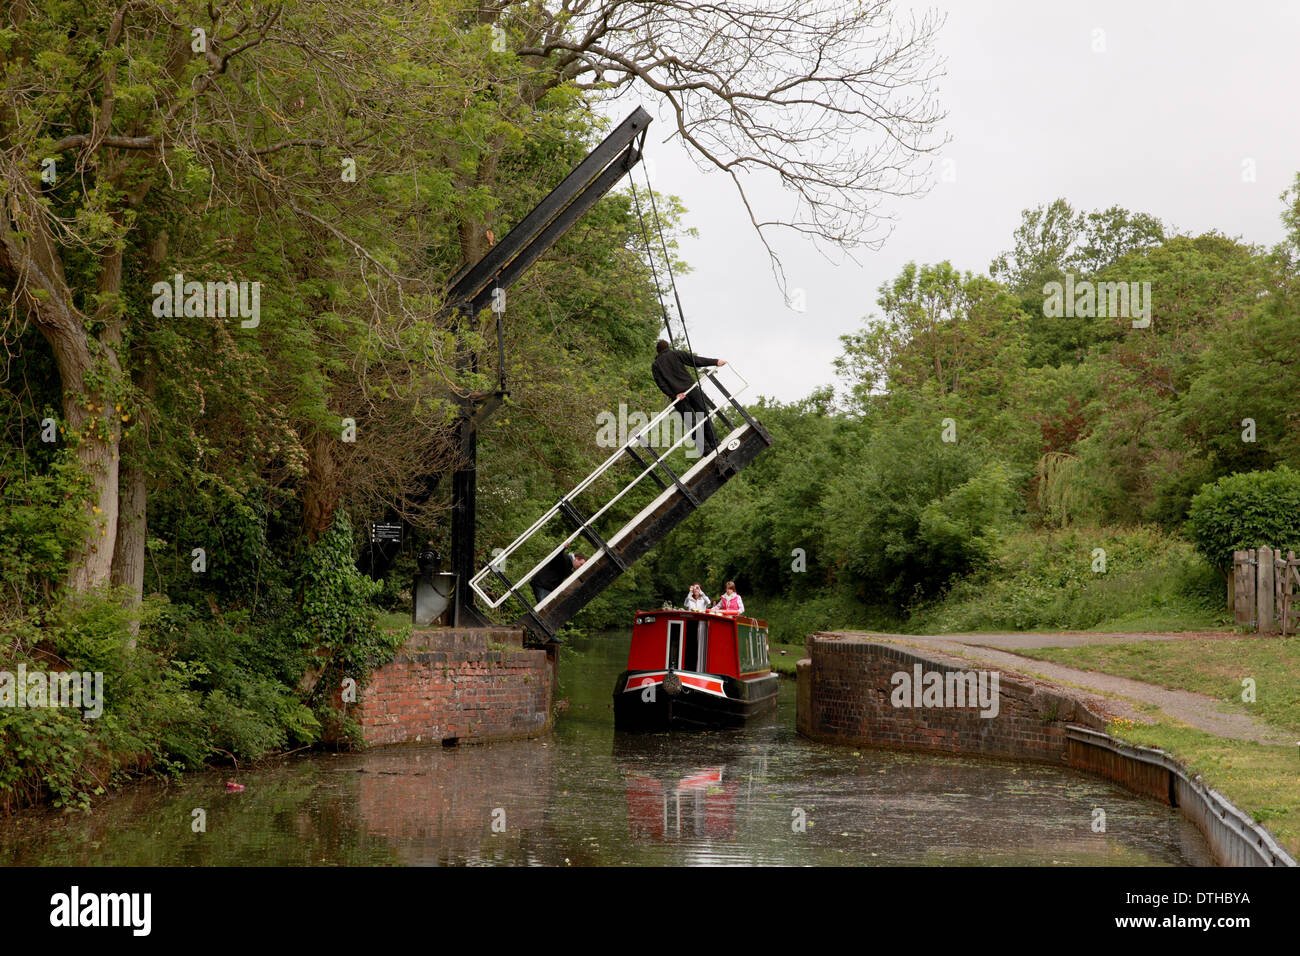 A man standing on the raised lift bridge at Hockley Heath on the Stratford on Avon Canal with a narrowboat underneath Stock Photo